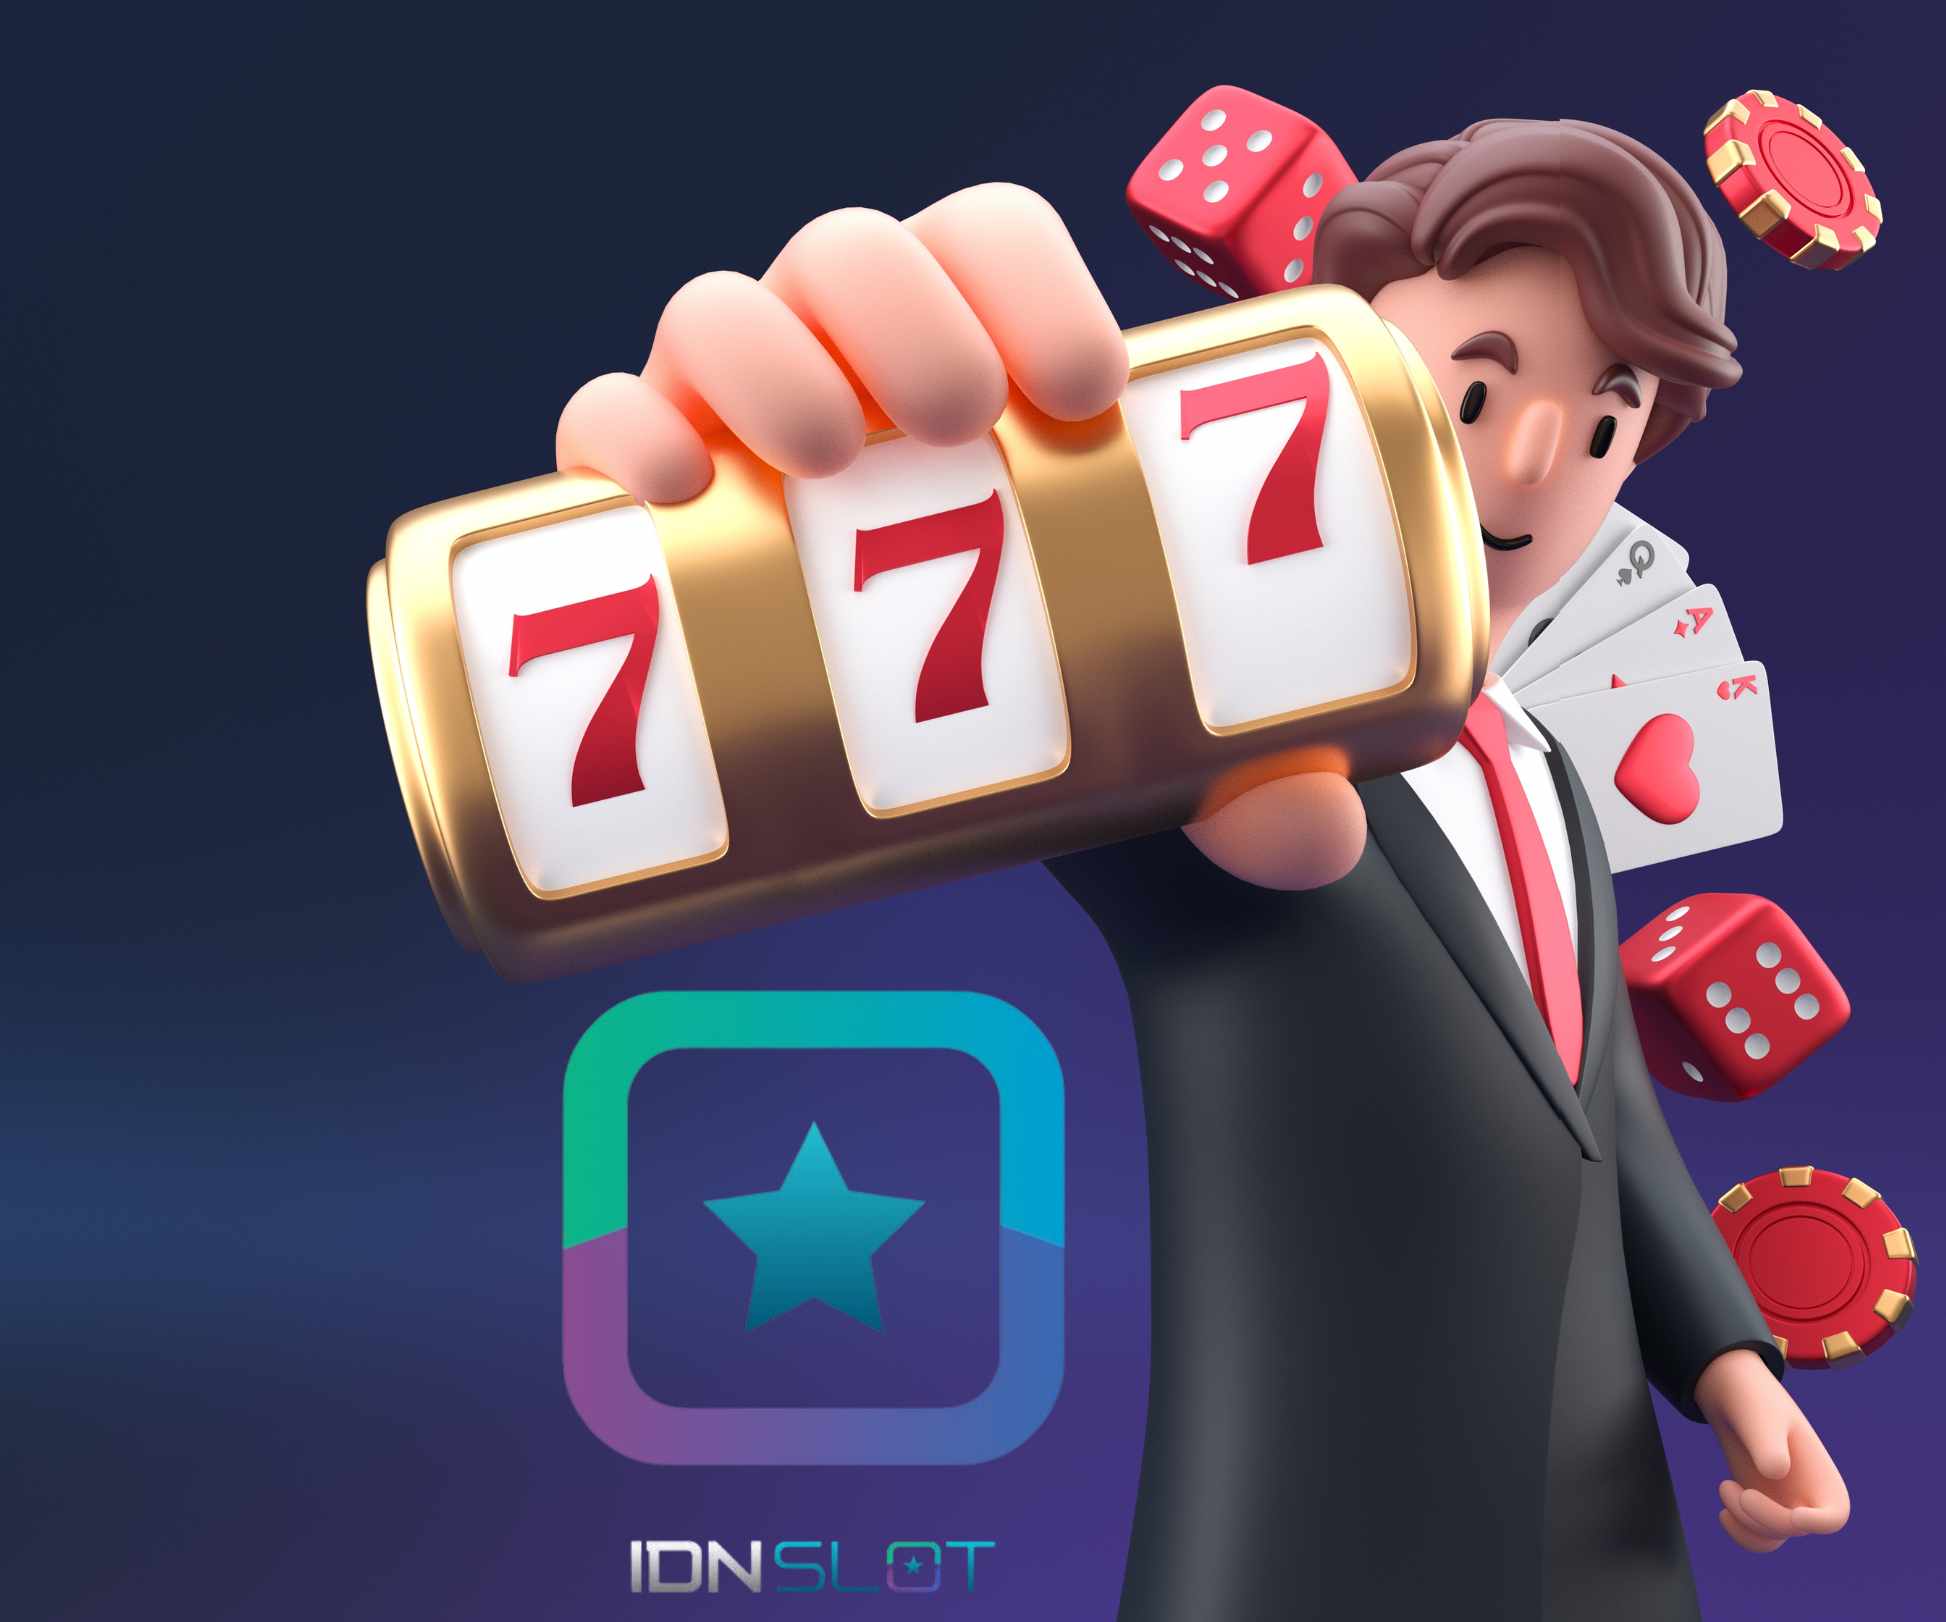 Idn slot opportunity to win a new big win